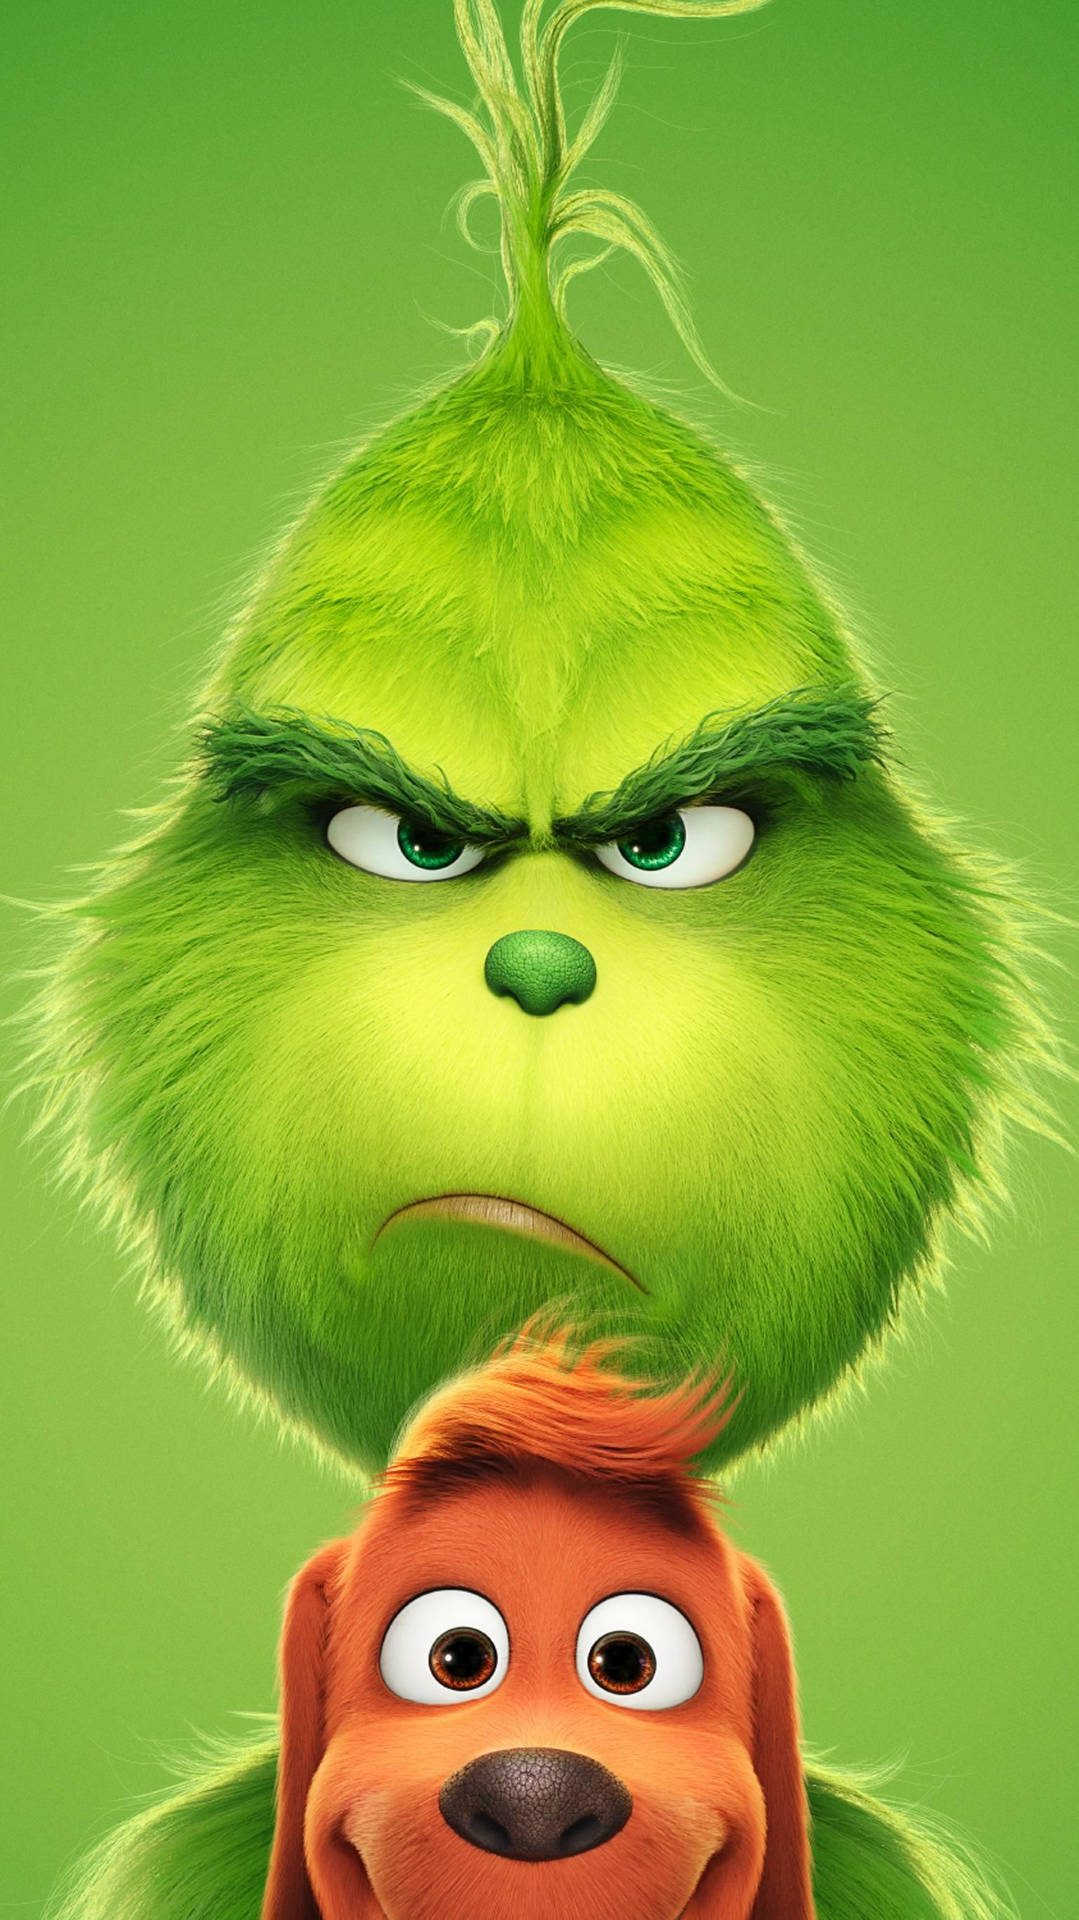 The Grinch Annoyed Picture